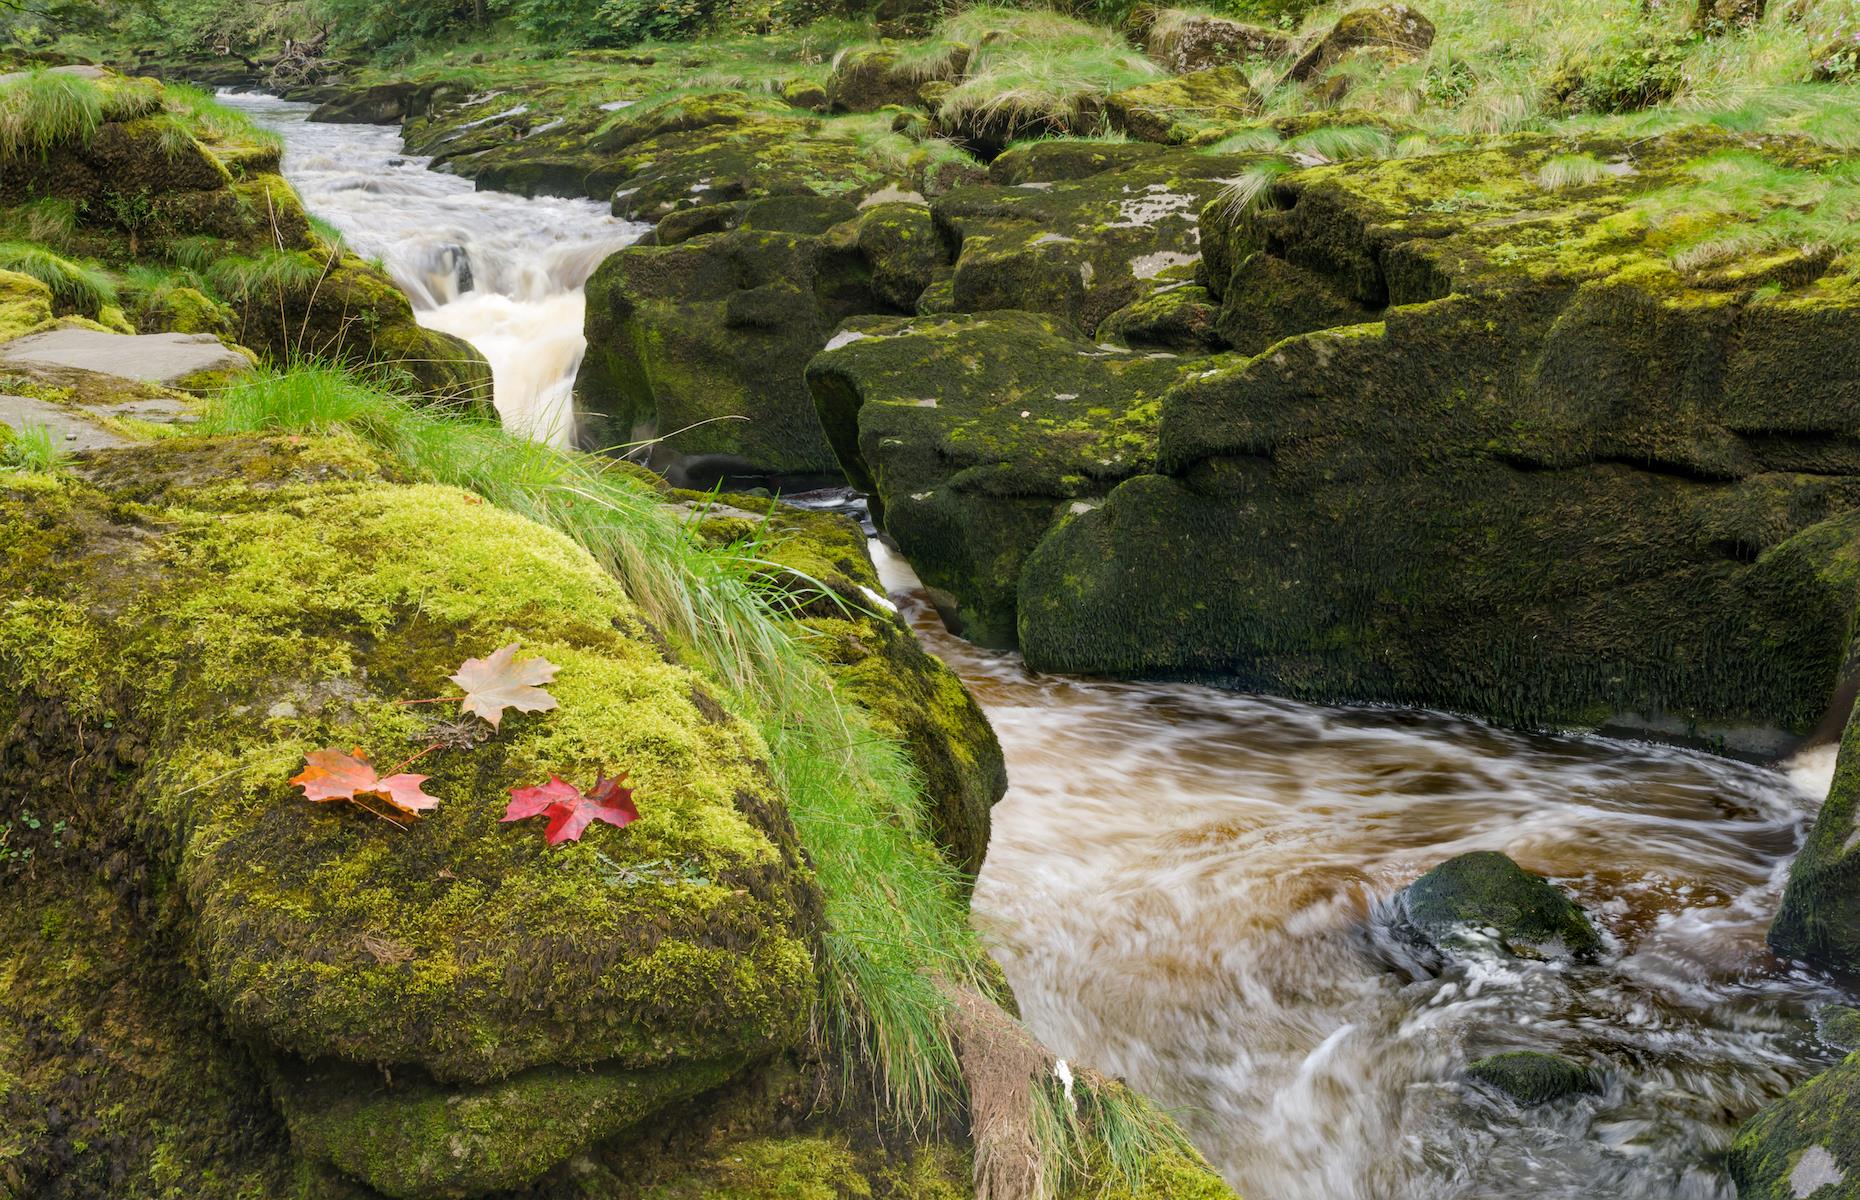 <p>A pinch point in the river, the Strid's churning water is dangerously cold and fast-flowing with strong undercurrents, while its course is pocked with rocky outcrops and underwater caves. The Strid's narrow channel is also deceptively deep, even more so after heavy rain when water levels have been known to rise five feet (1.5m) in less than a minute. An information board at the site says that the Strid is over 30 feet (9m) deep or "more than two double-decker buses on top of each other", and even standing on the mossy rocks that line its banks carries danger as it’s all too easy to slip in.</p>